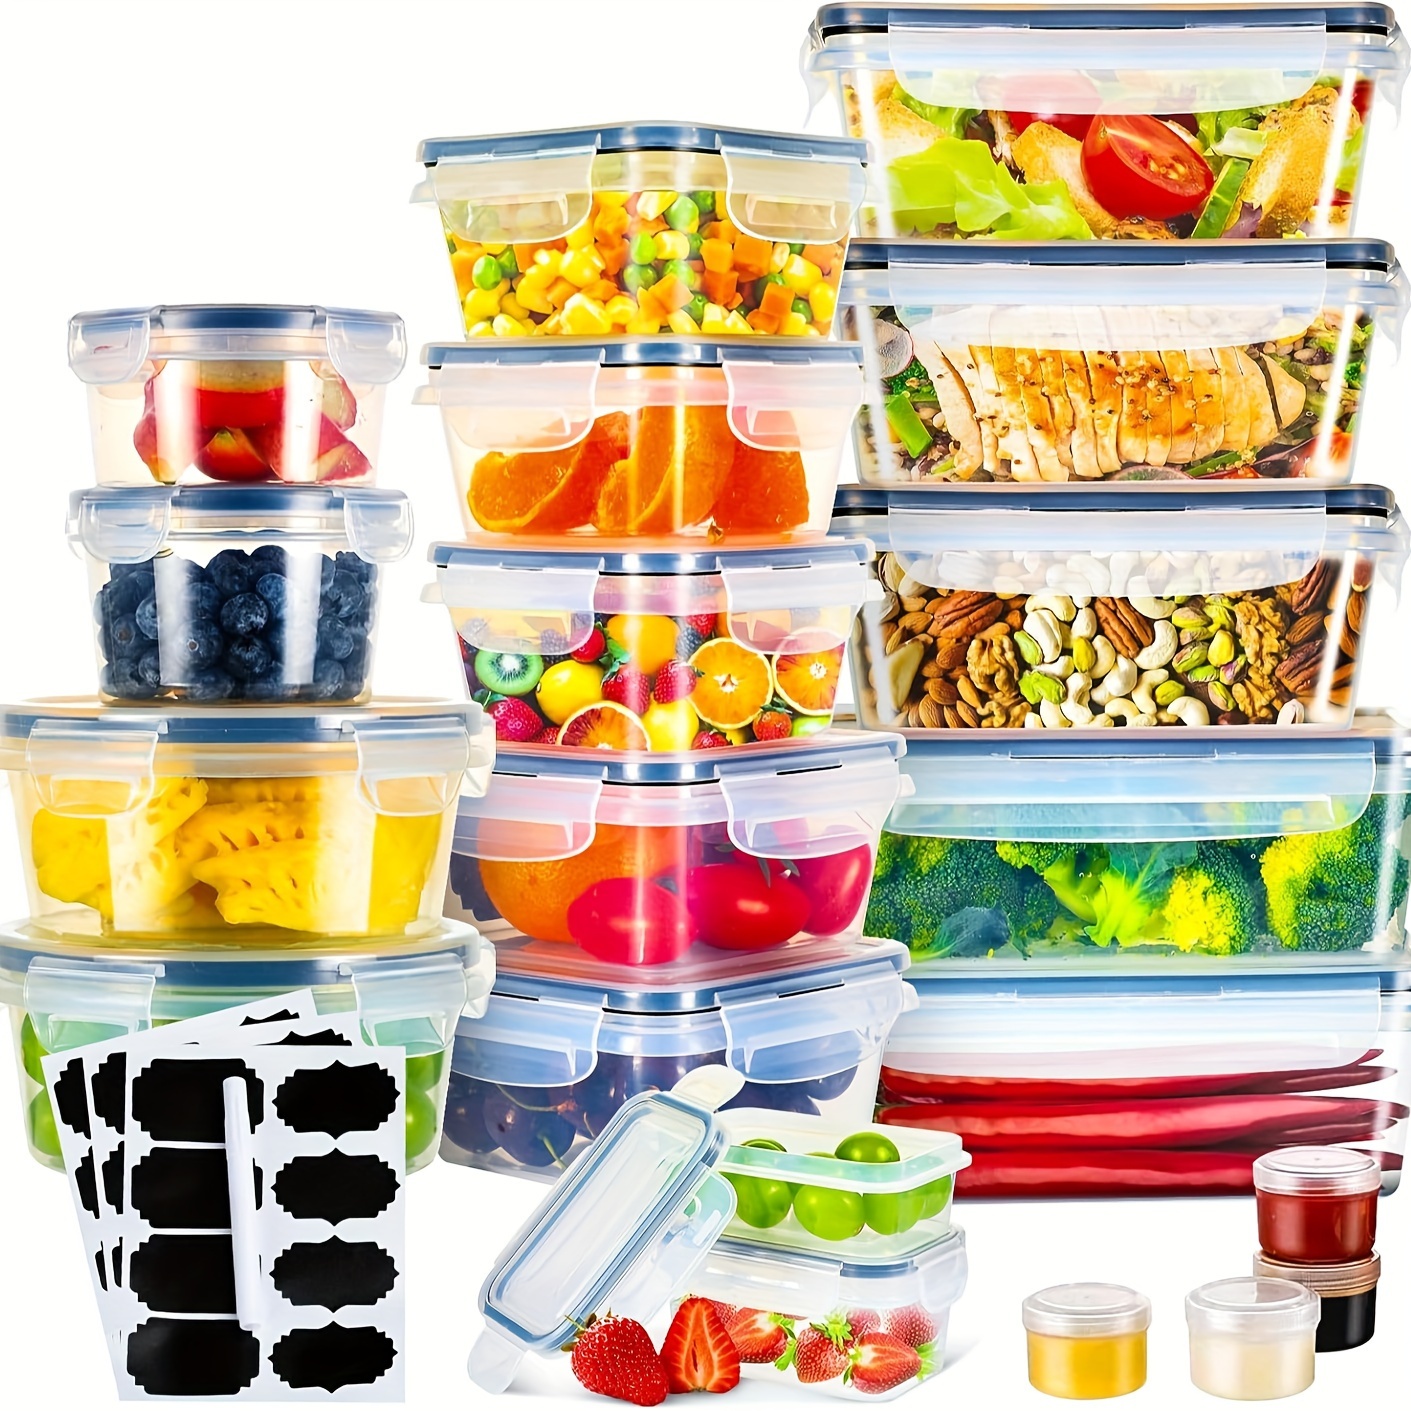 KEMETHY 36-Piece Food Storage Containers with Lids Airtight(18 Containers & 18 Lids) Plastic Food Containers for Pantry & Kitchen Storage and